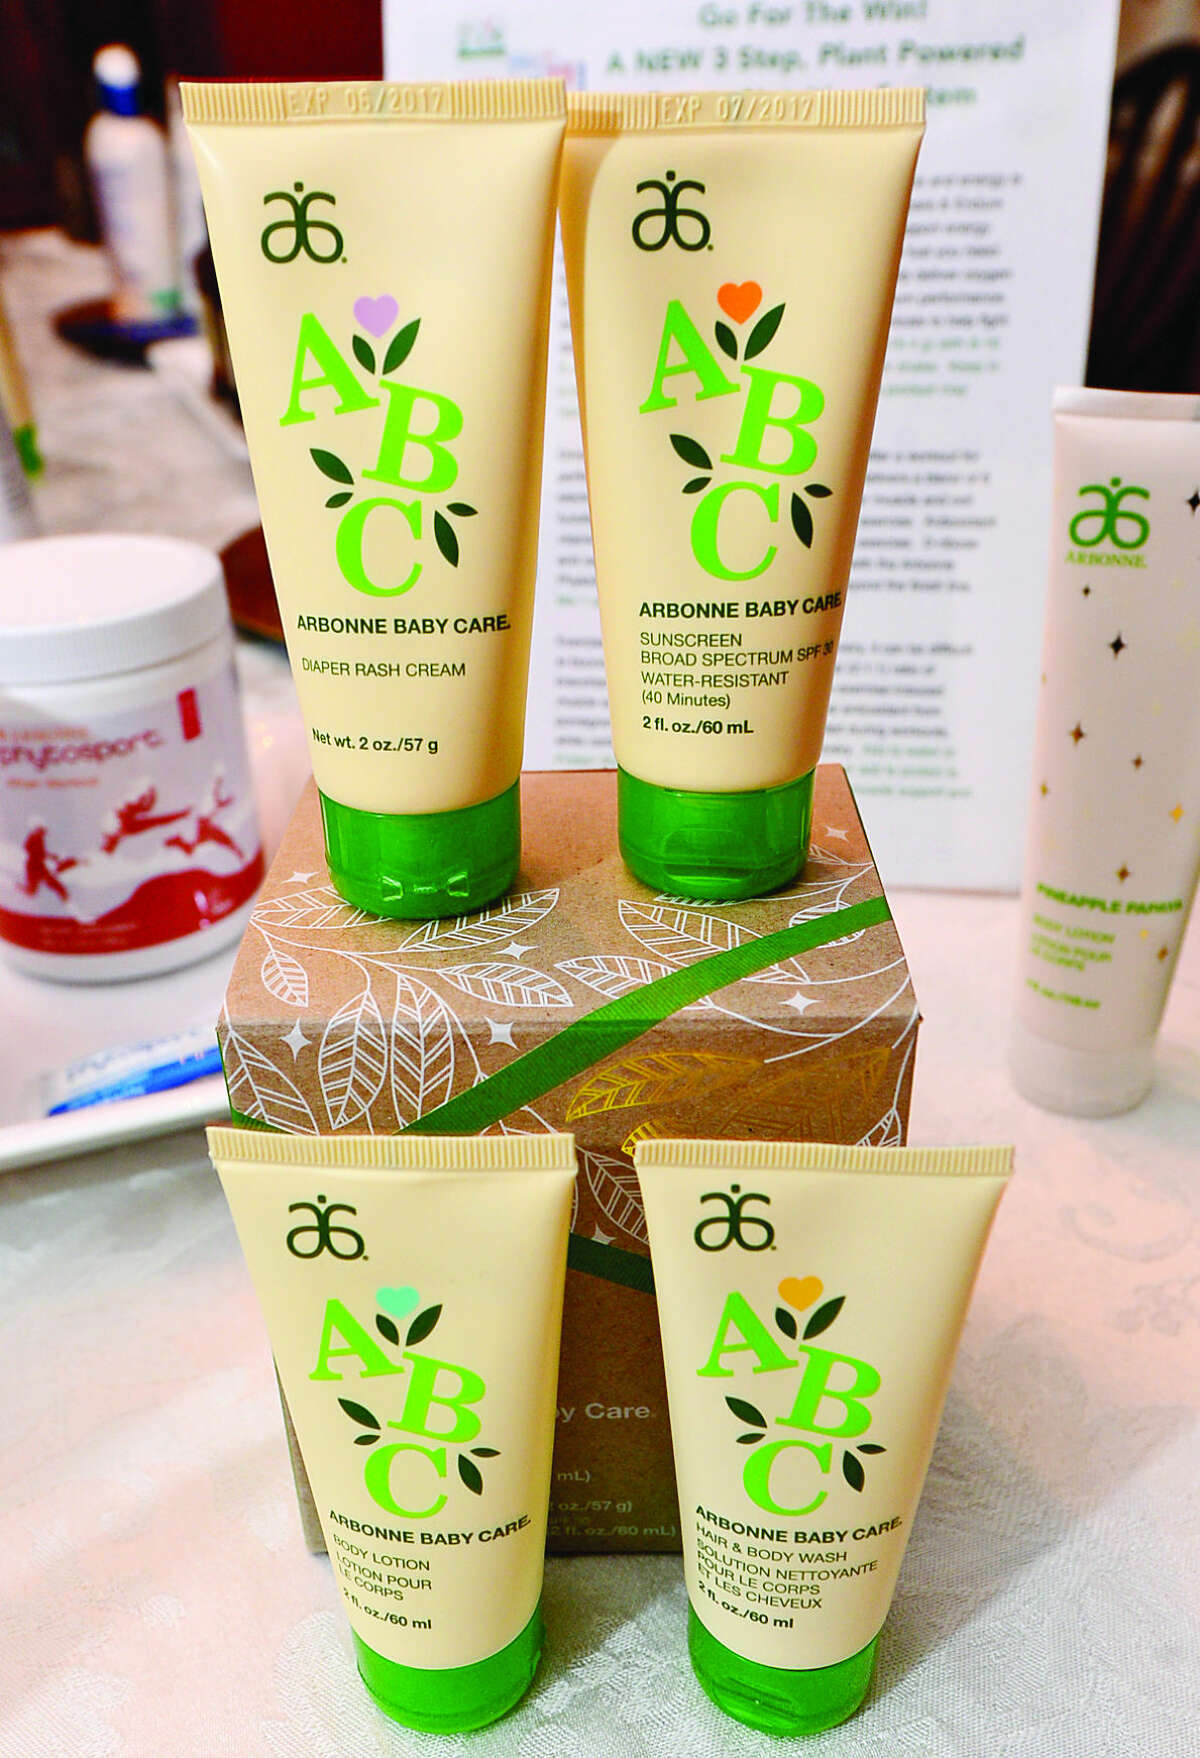 Hour photo / Erik Trautmann Weston resident Kristin Kreuder, an Arbonne Independent Consultant, is donating Arbonne beauty and skincare products, including Arbonne Baby Care gift sets, to Malta House in Norwalk for Christmas.